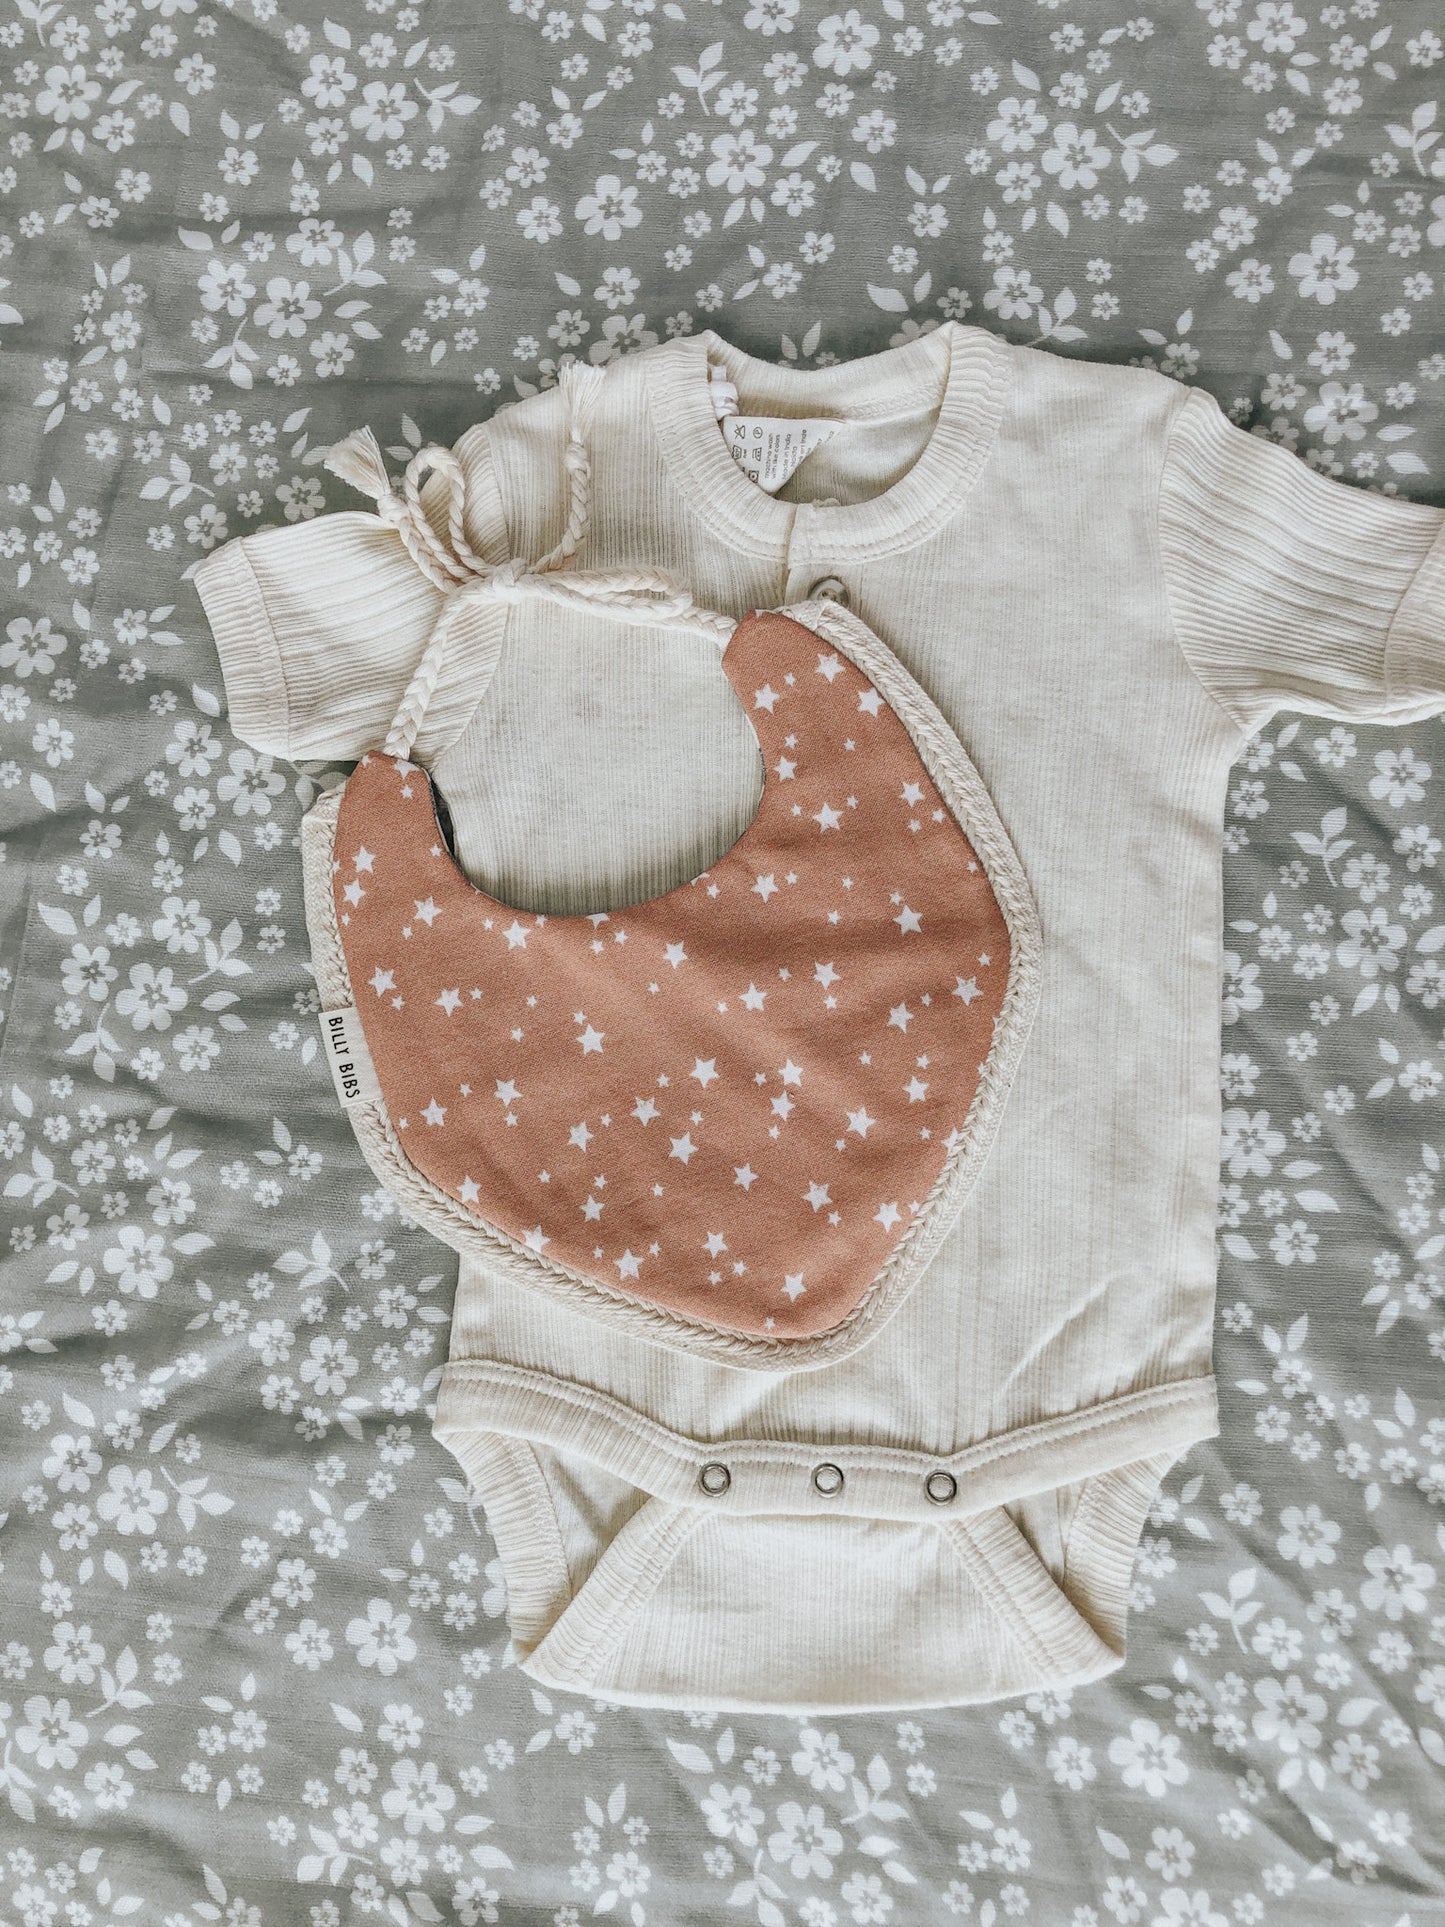 billy-bibs-baby-outfit3